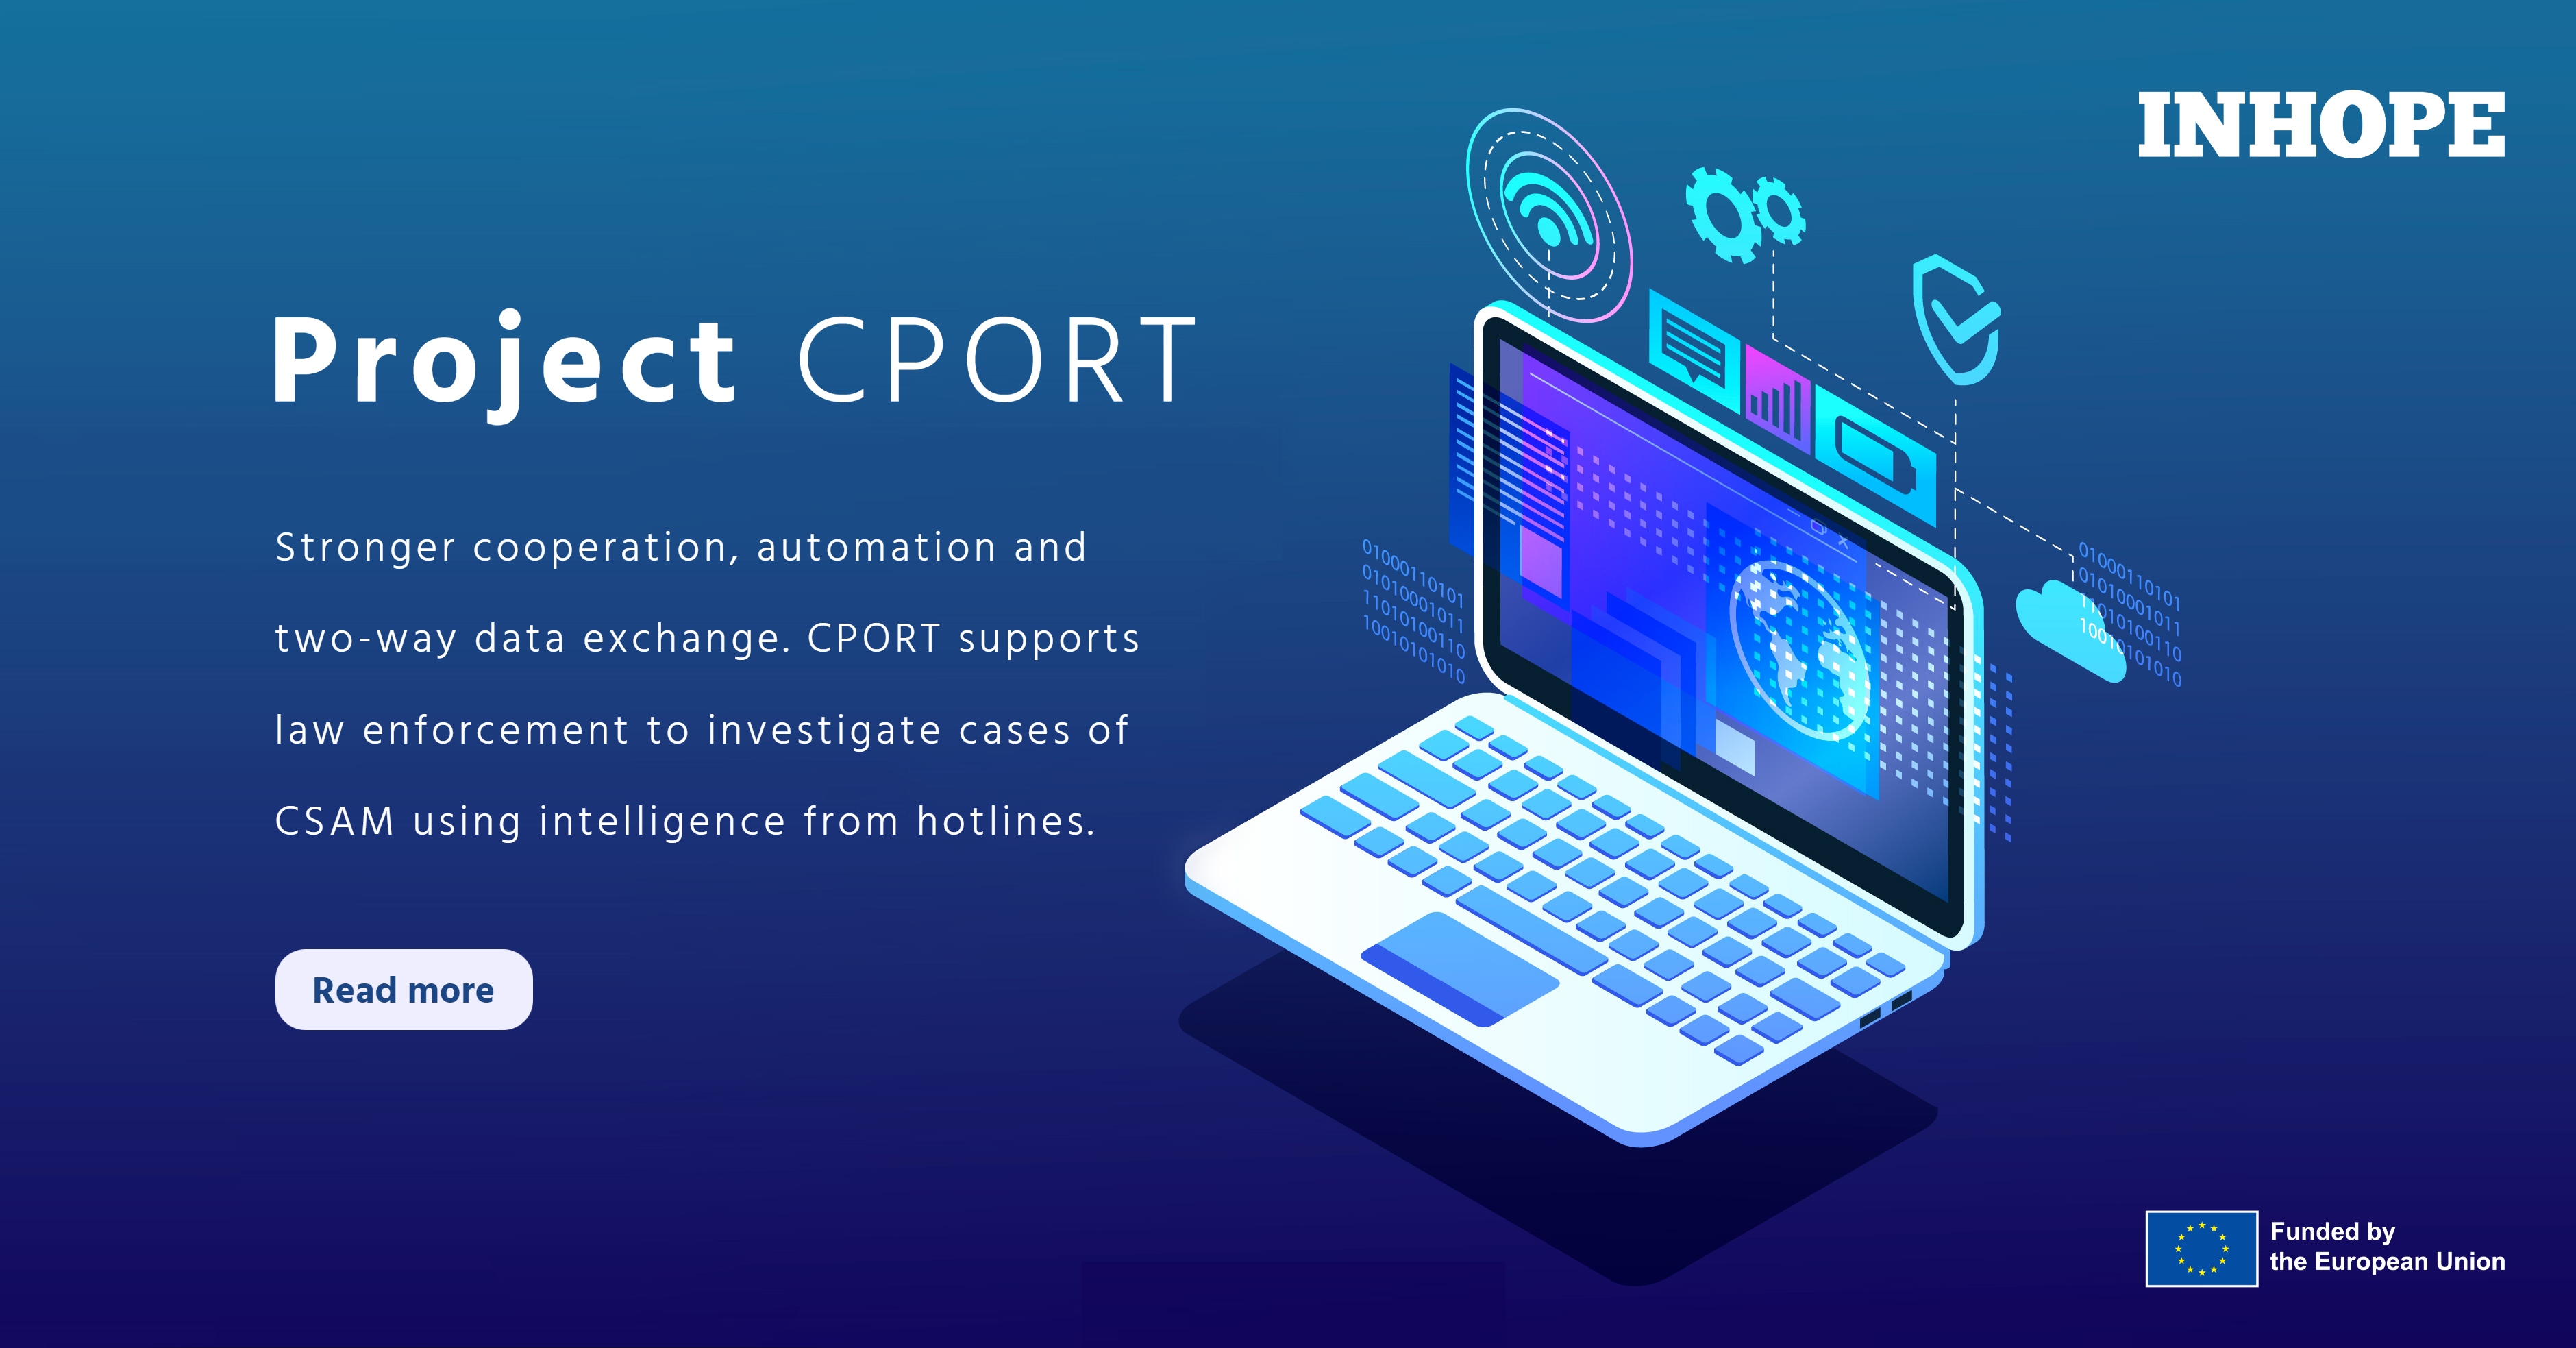 INHOPE launches Project CPORT